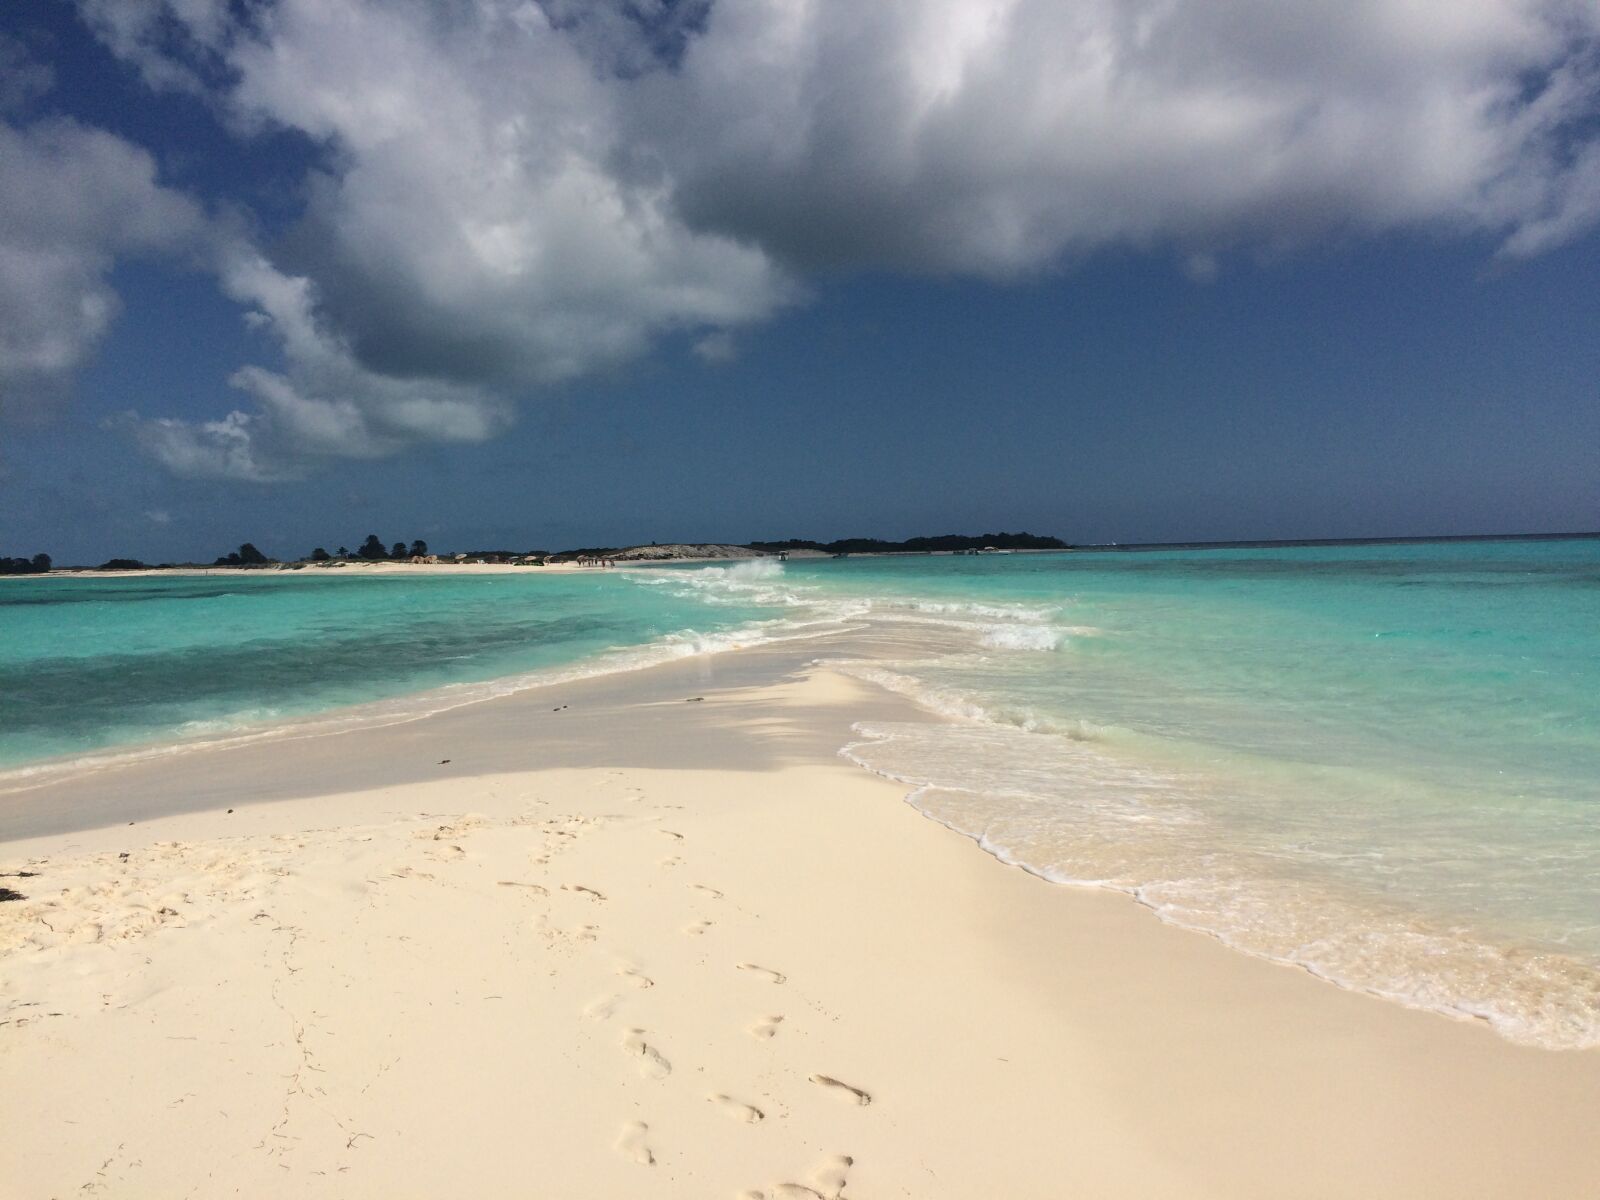 Apple iPhone 5s sample photo. Los roques, venezuela, relaxing photography